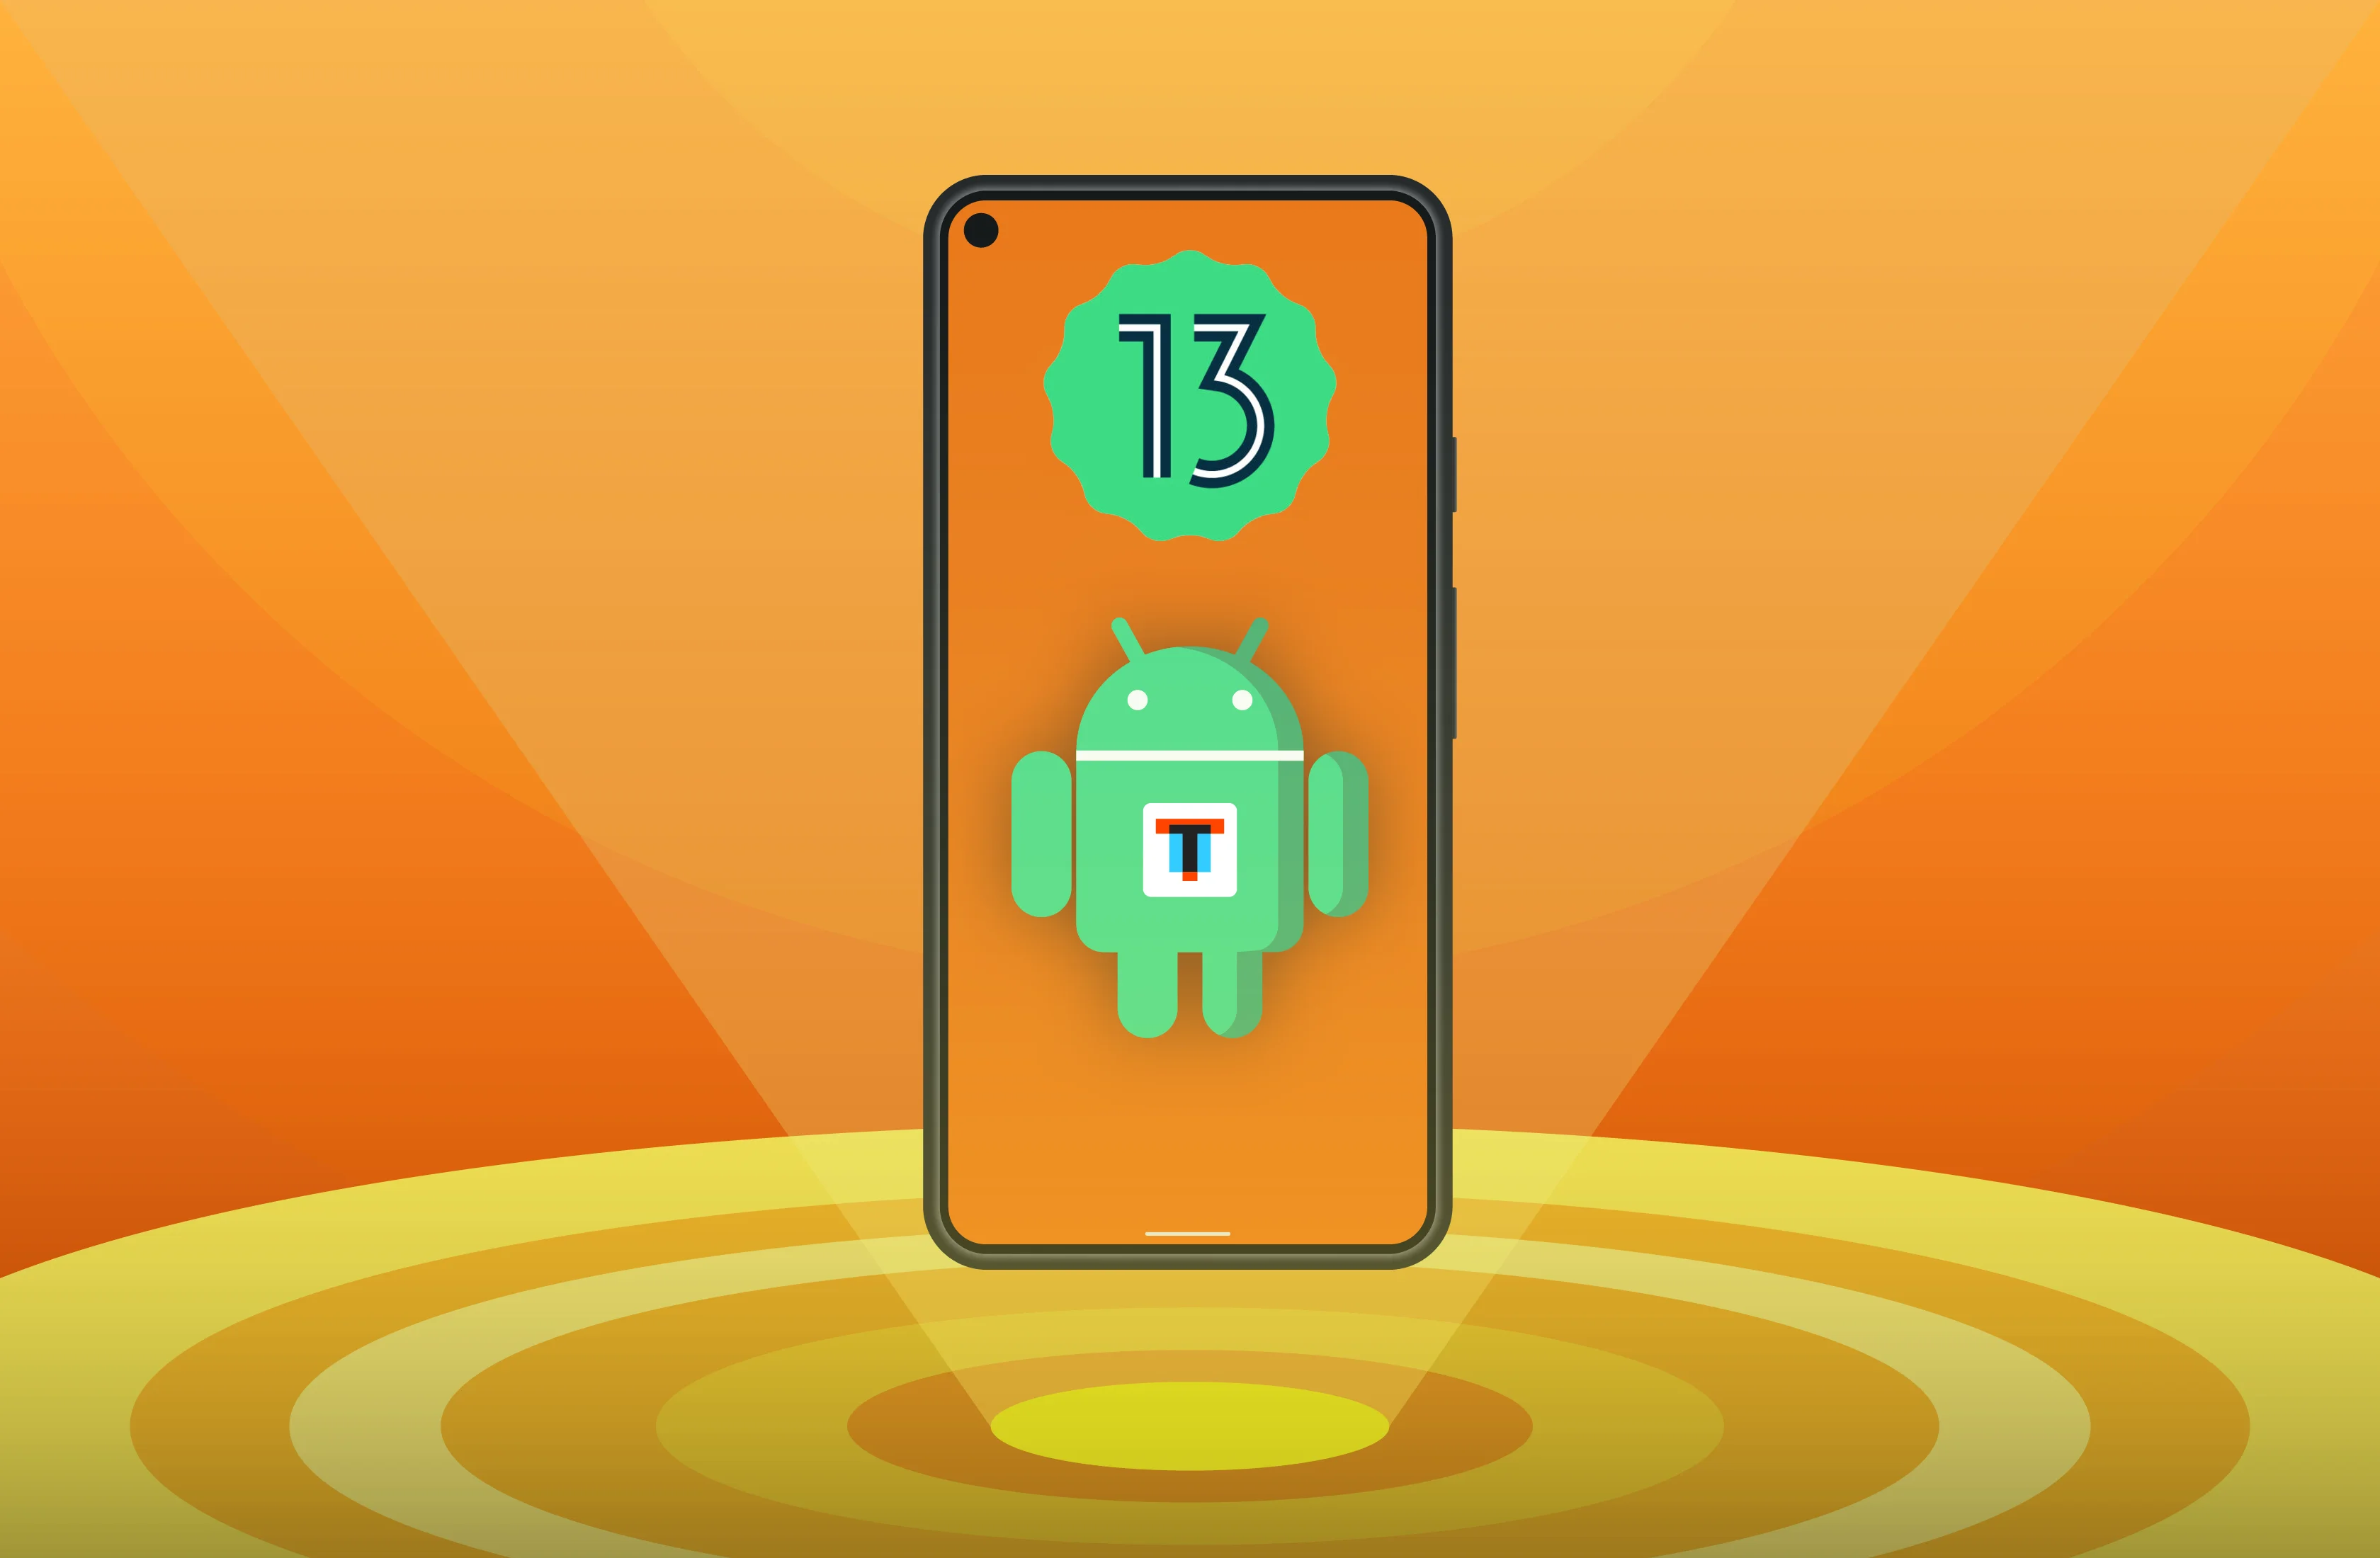 The first version of Android 13 became available to developers